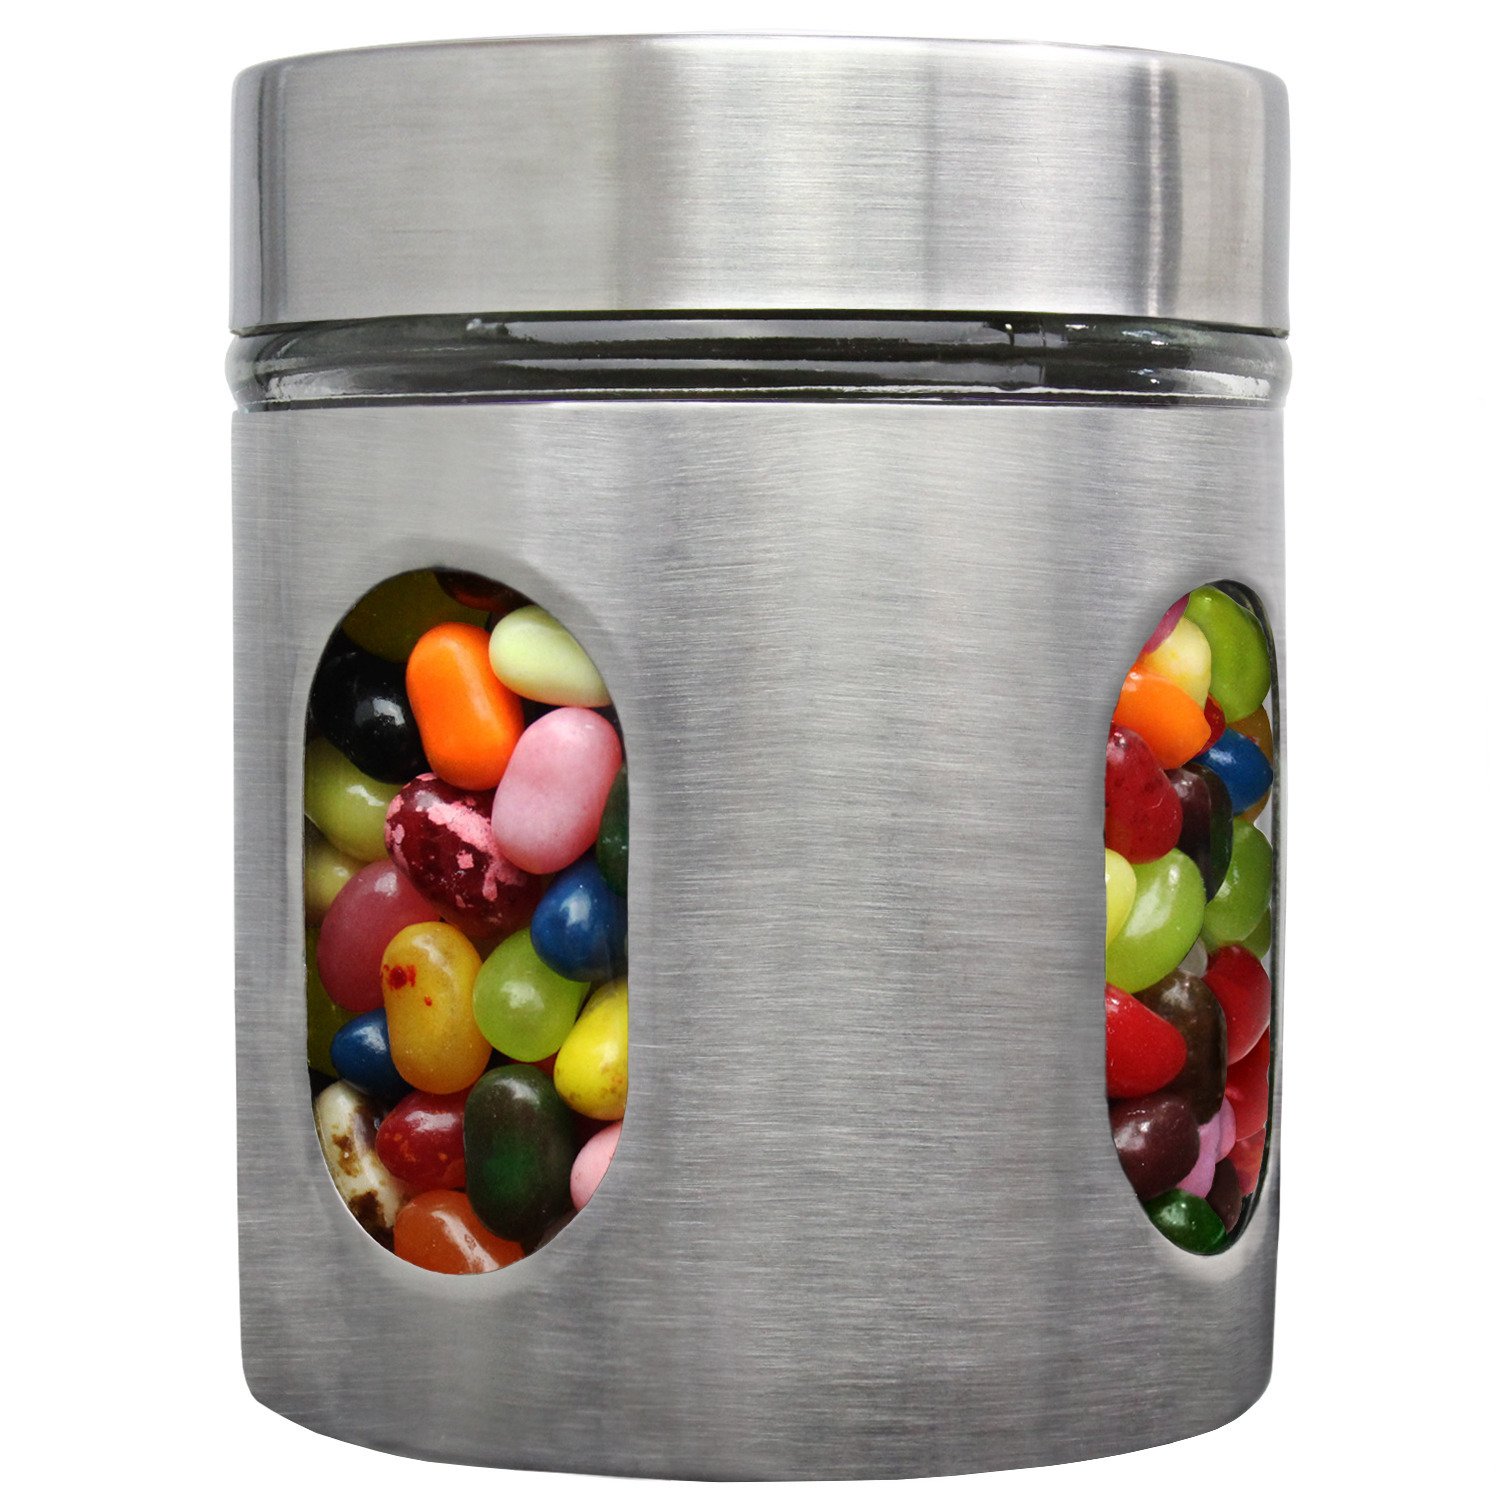 Blue Donuts 21oz Stainless Steel Canister with Window